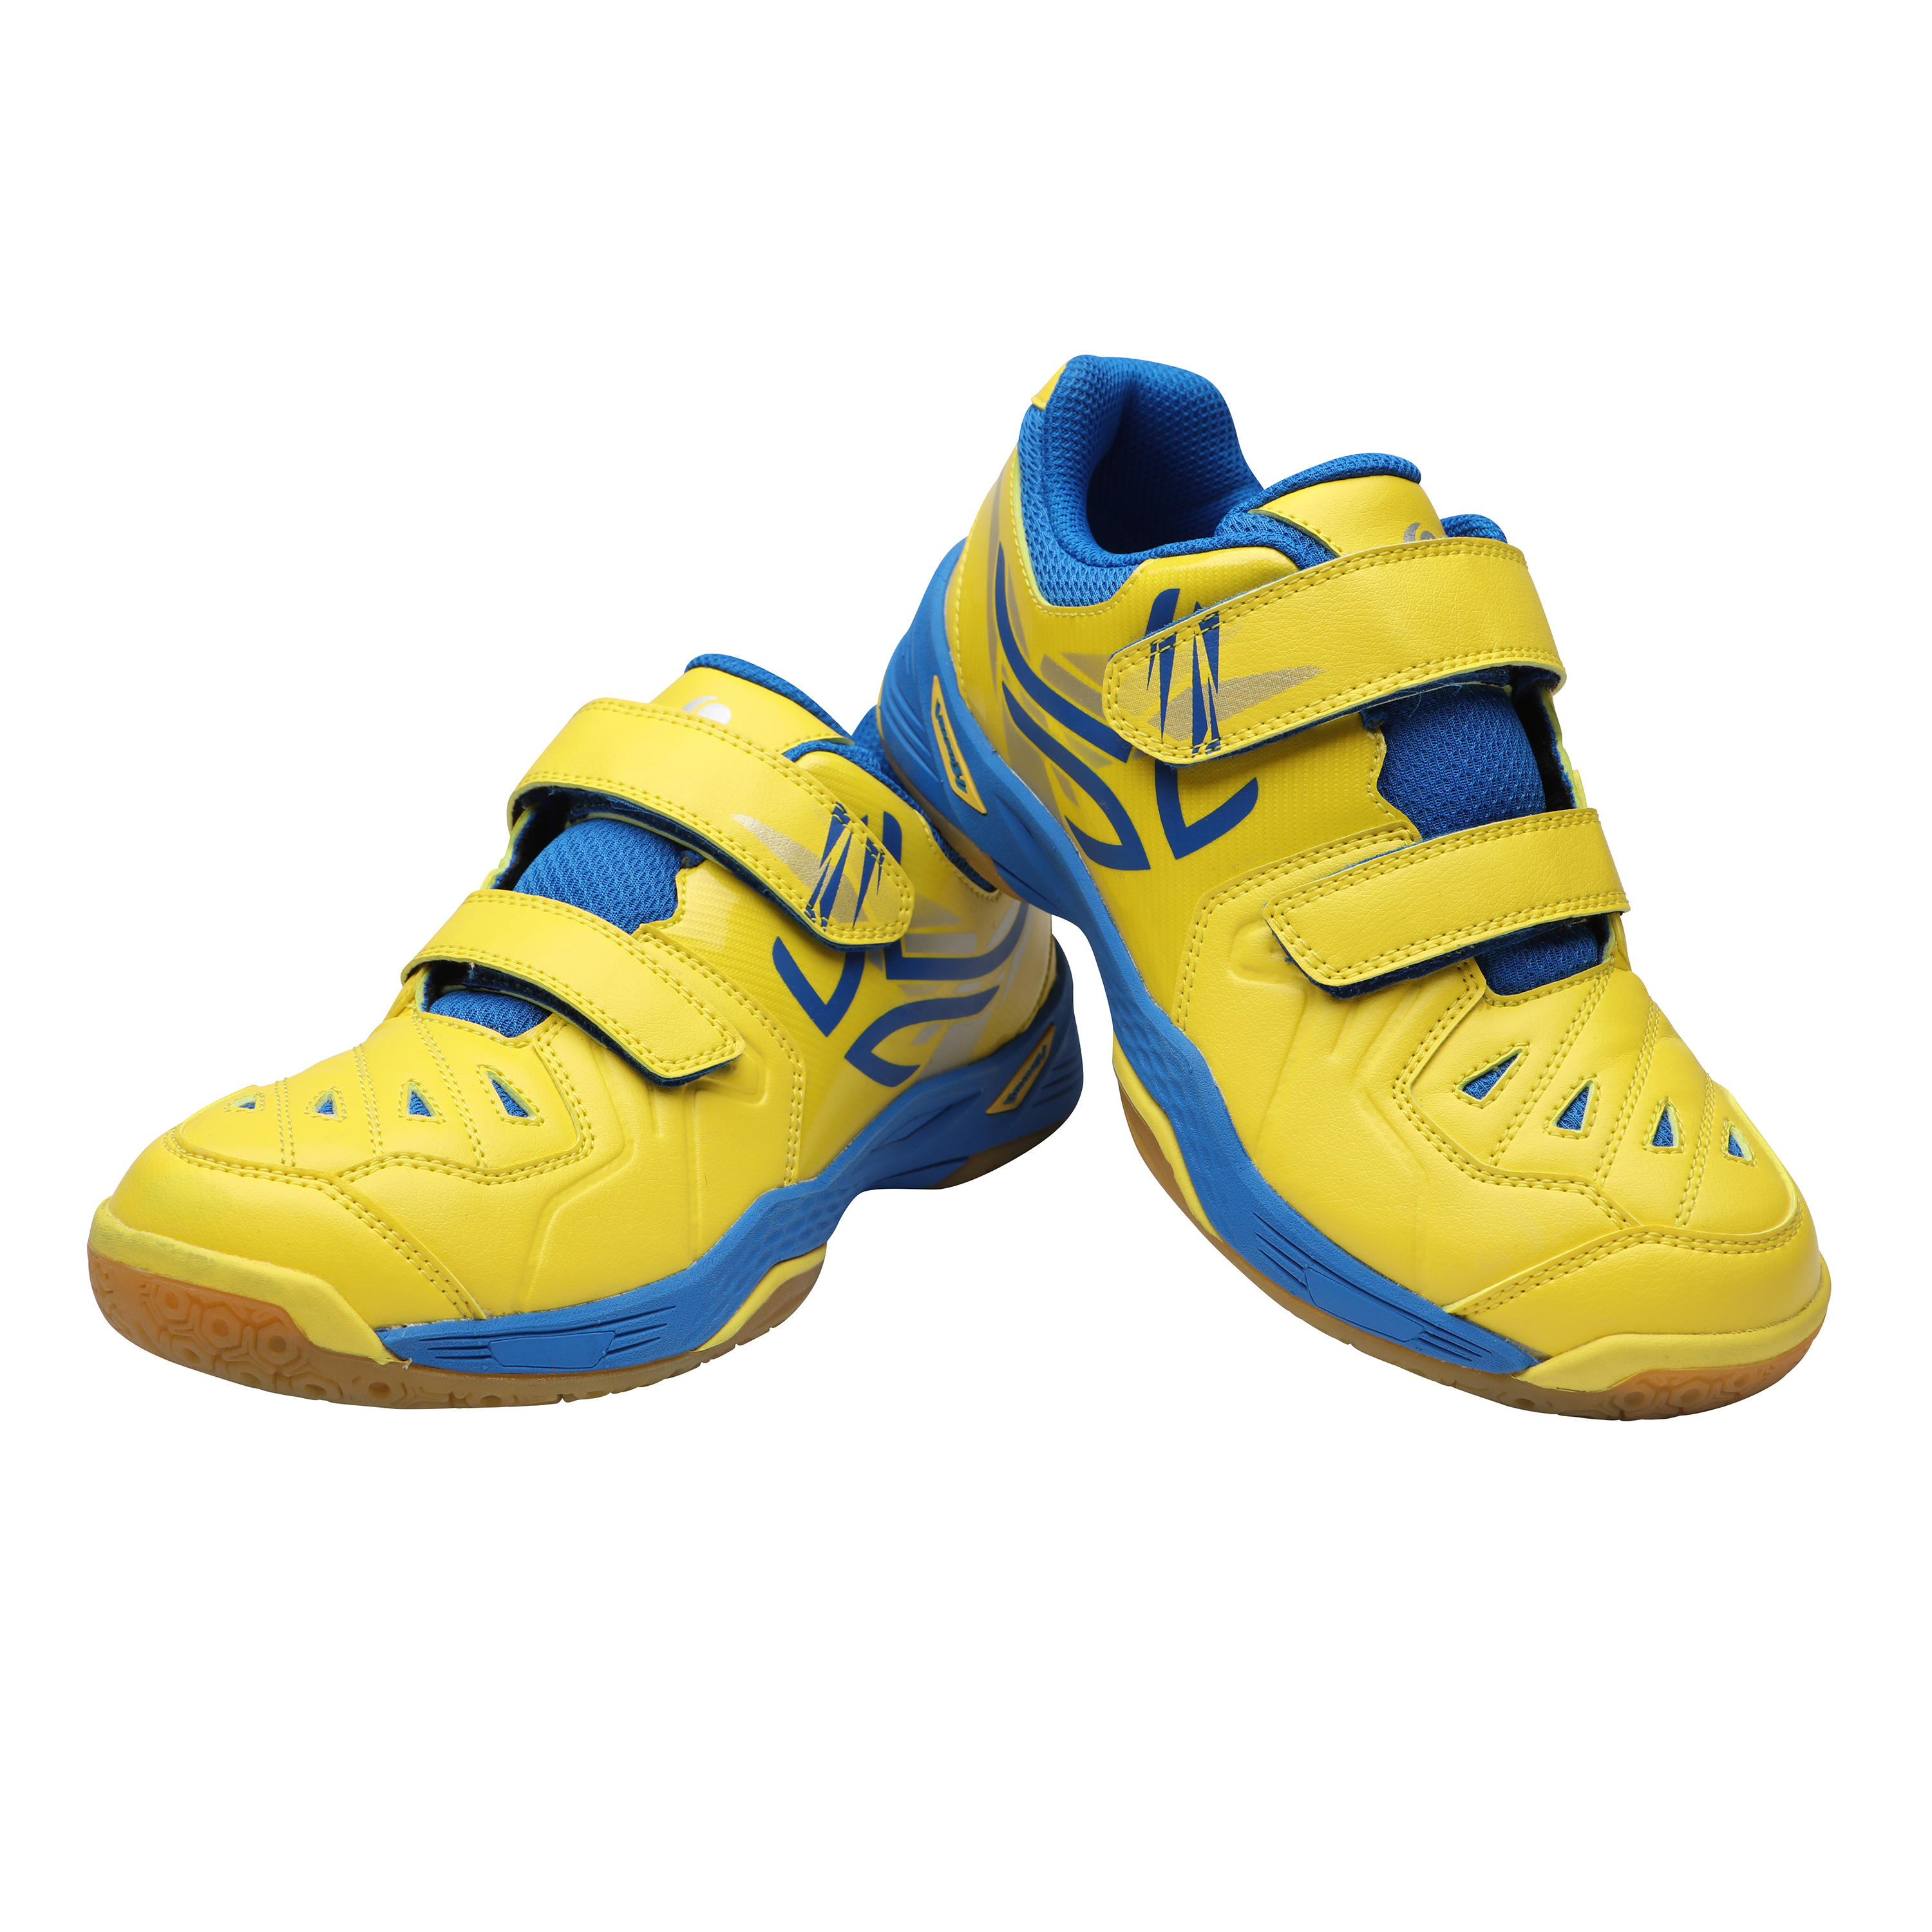 kd shoes yellow and blue